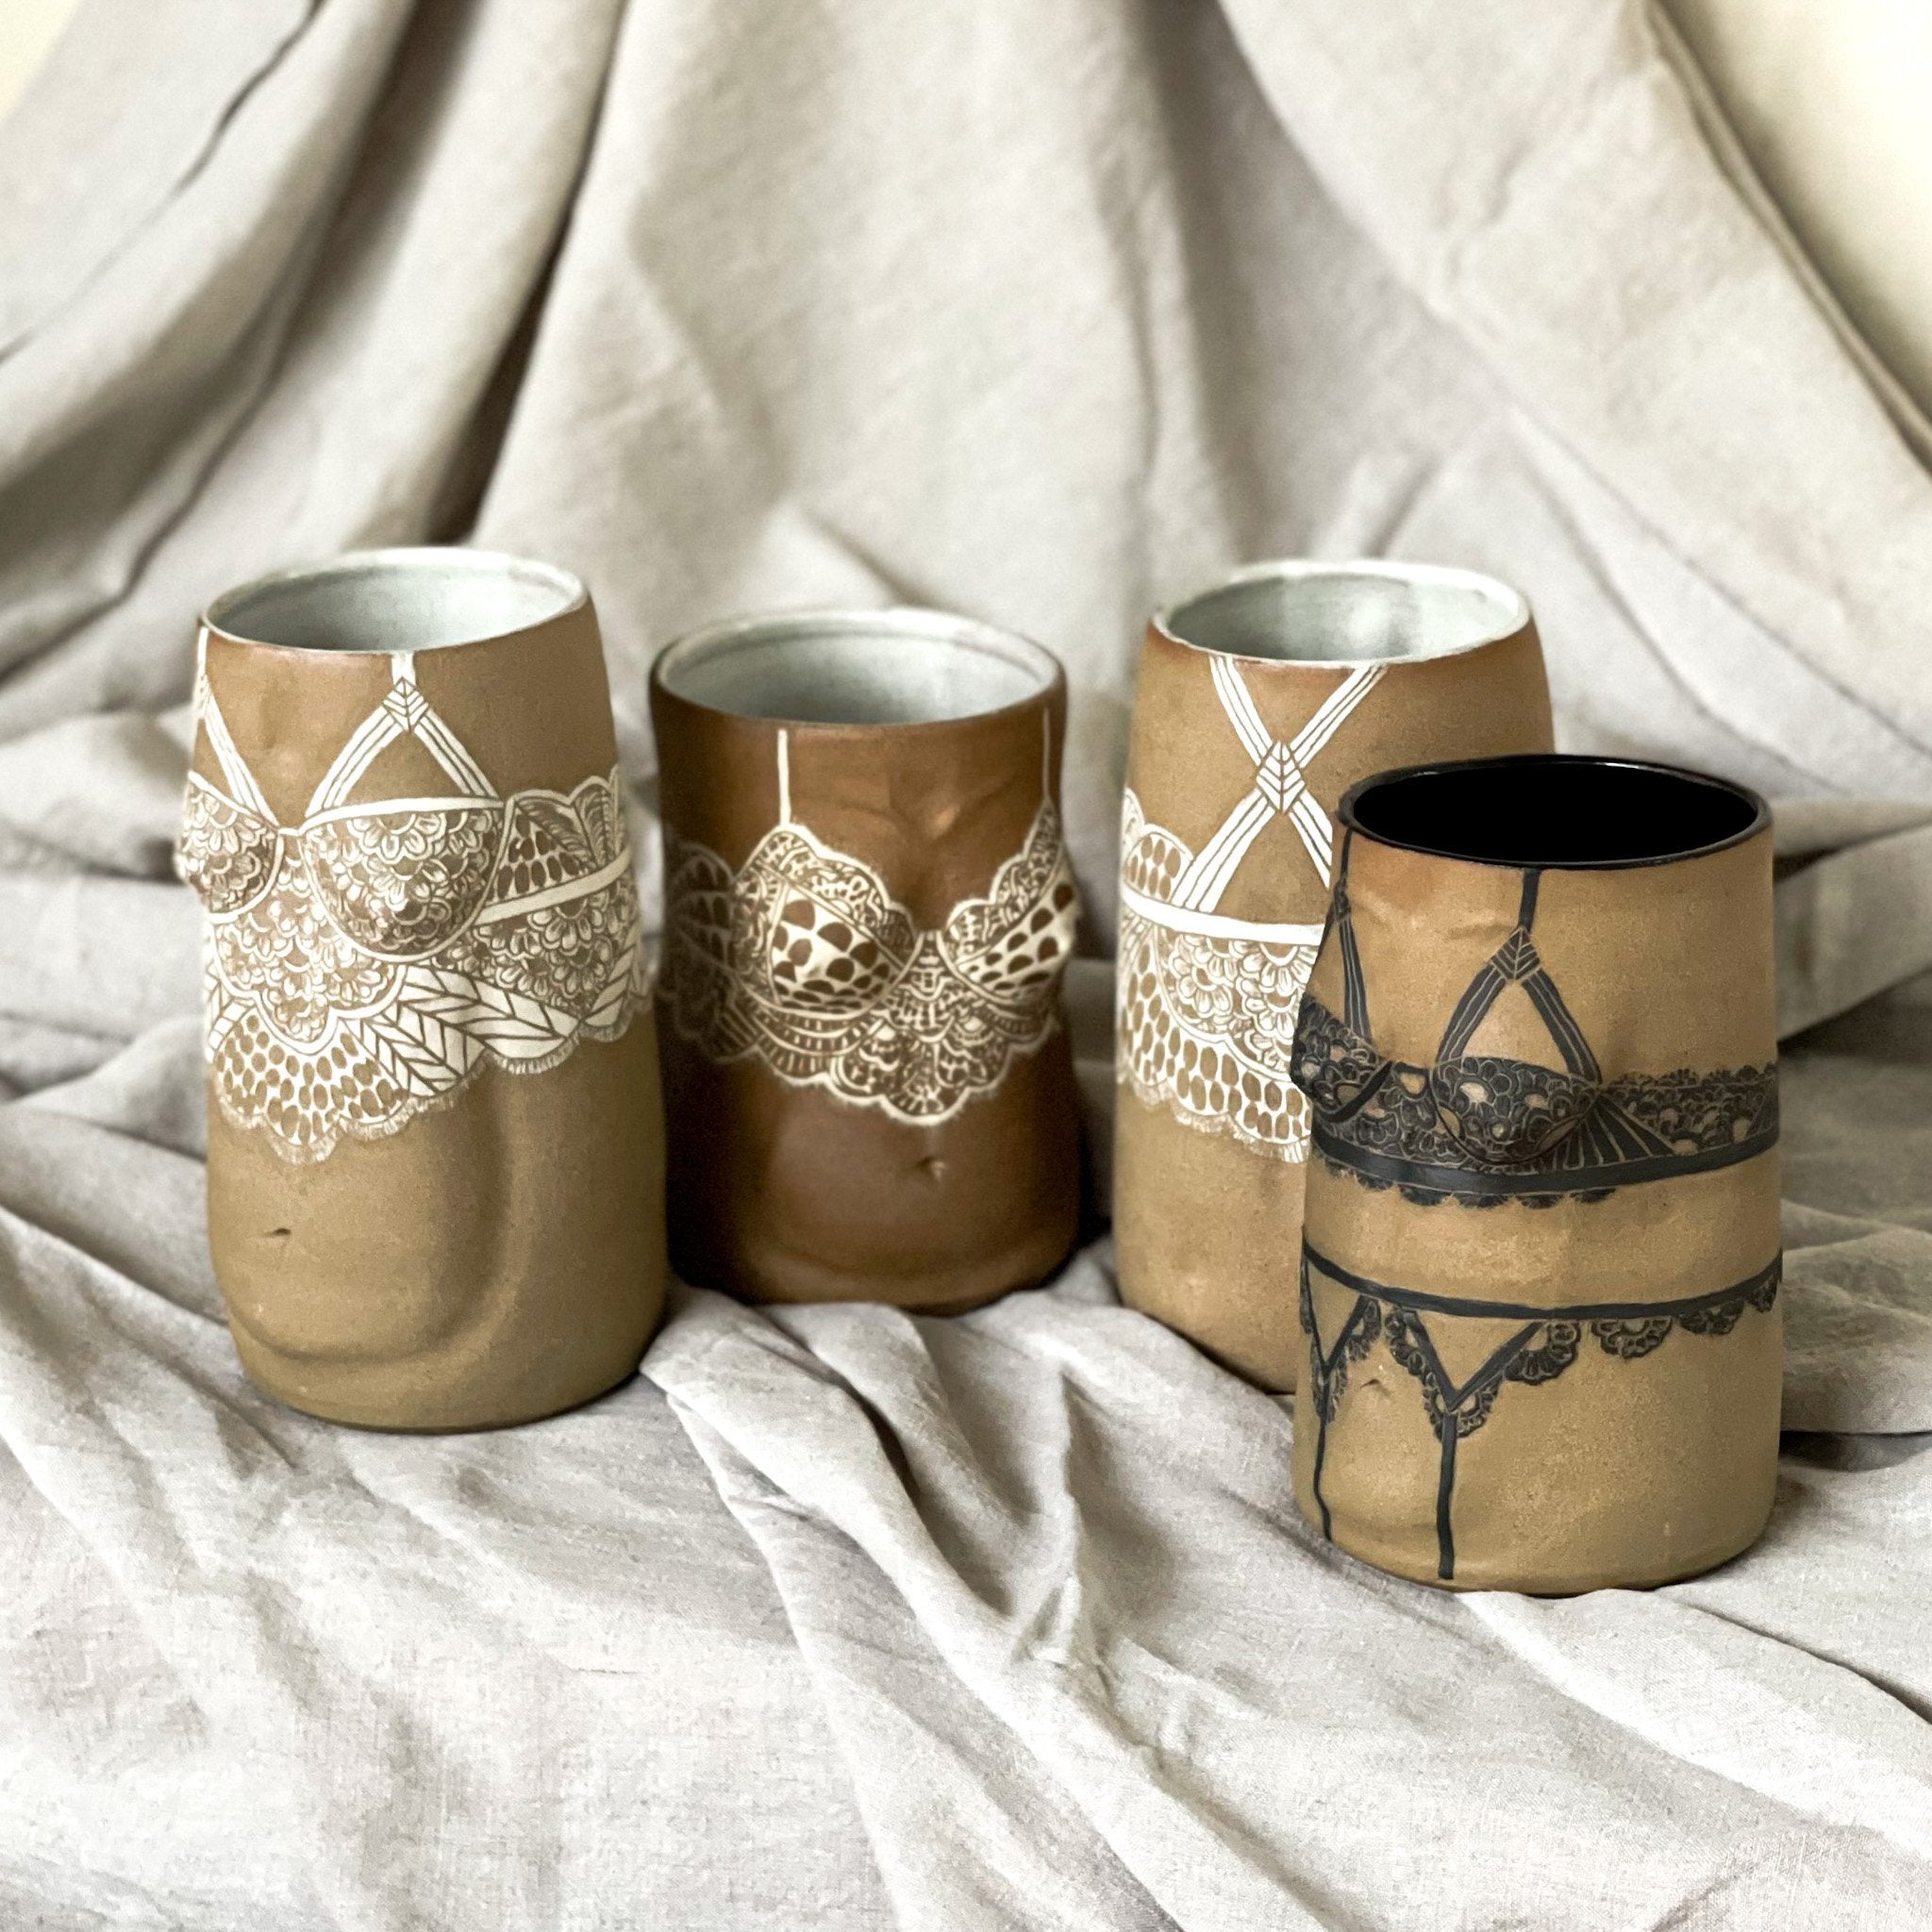 Hero shot of four vases from Déesses de la nuit Collection. Brown stoneware vases in the shape of the female form. With sgraffito lacework carving in white and black slips.